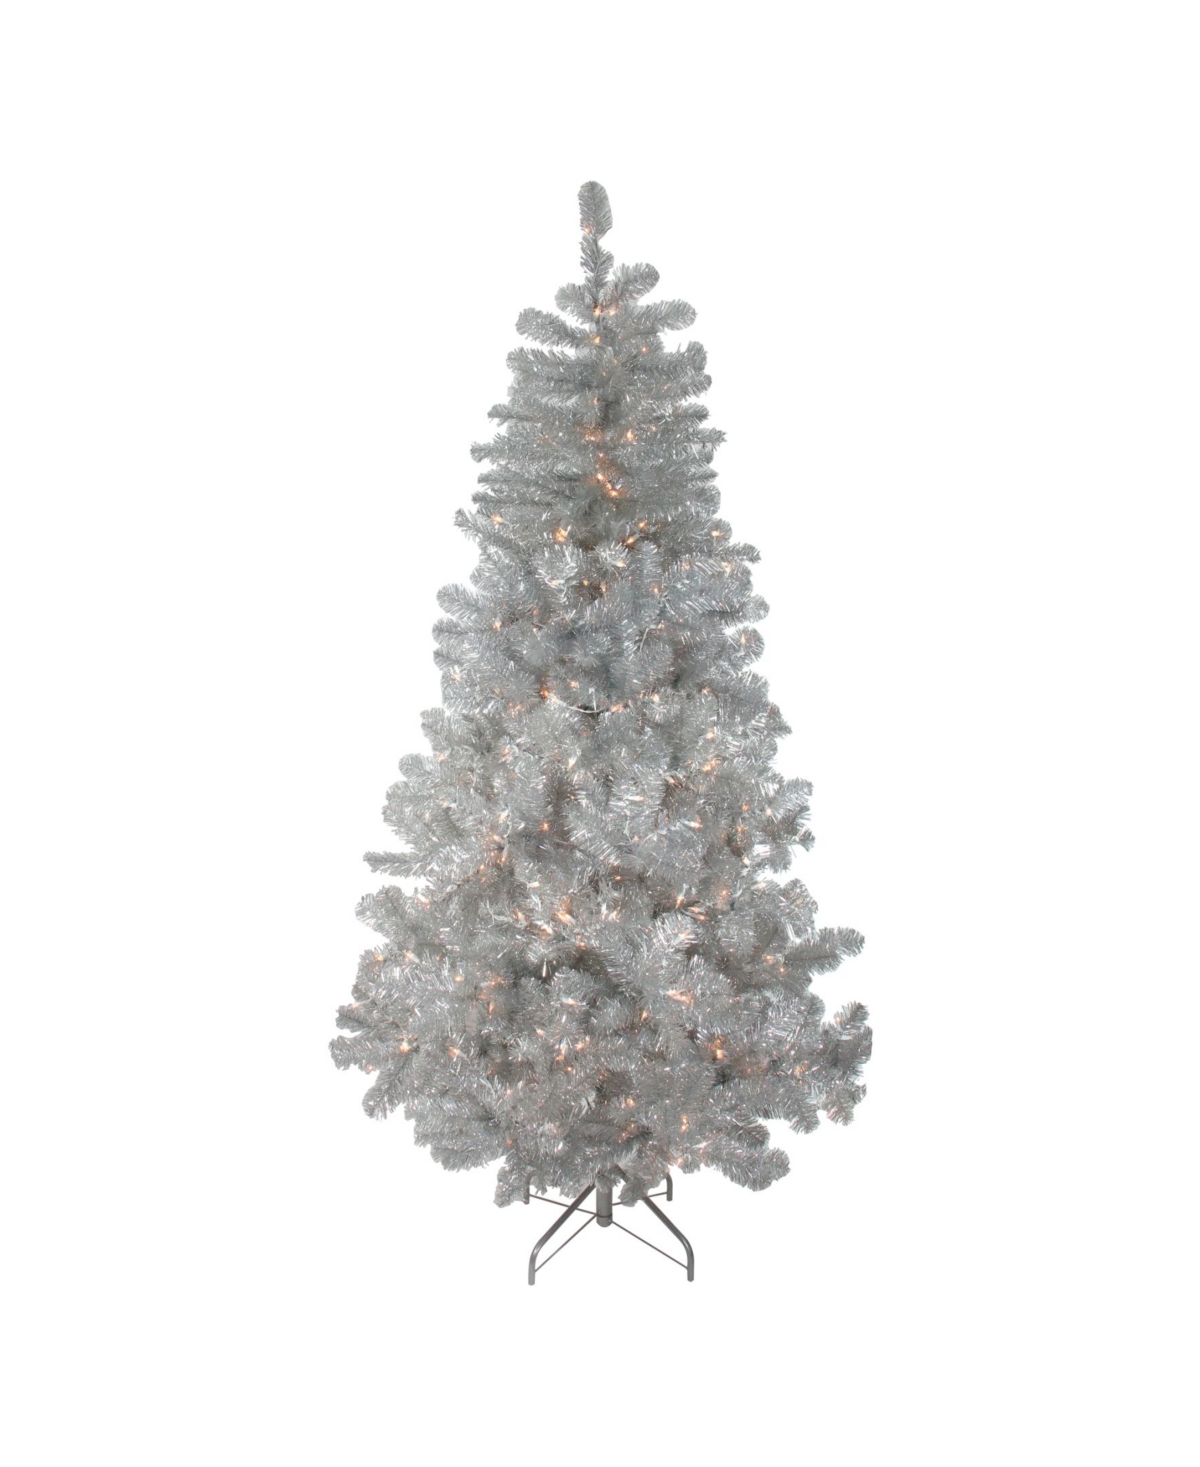 4.5' Pre-Lit Silver Metallic Artificial Tinsel Christmas Tree - Clear Lights - Silver